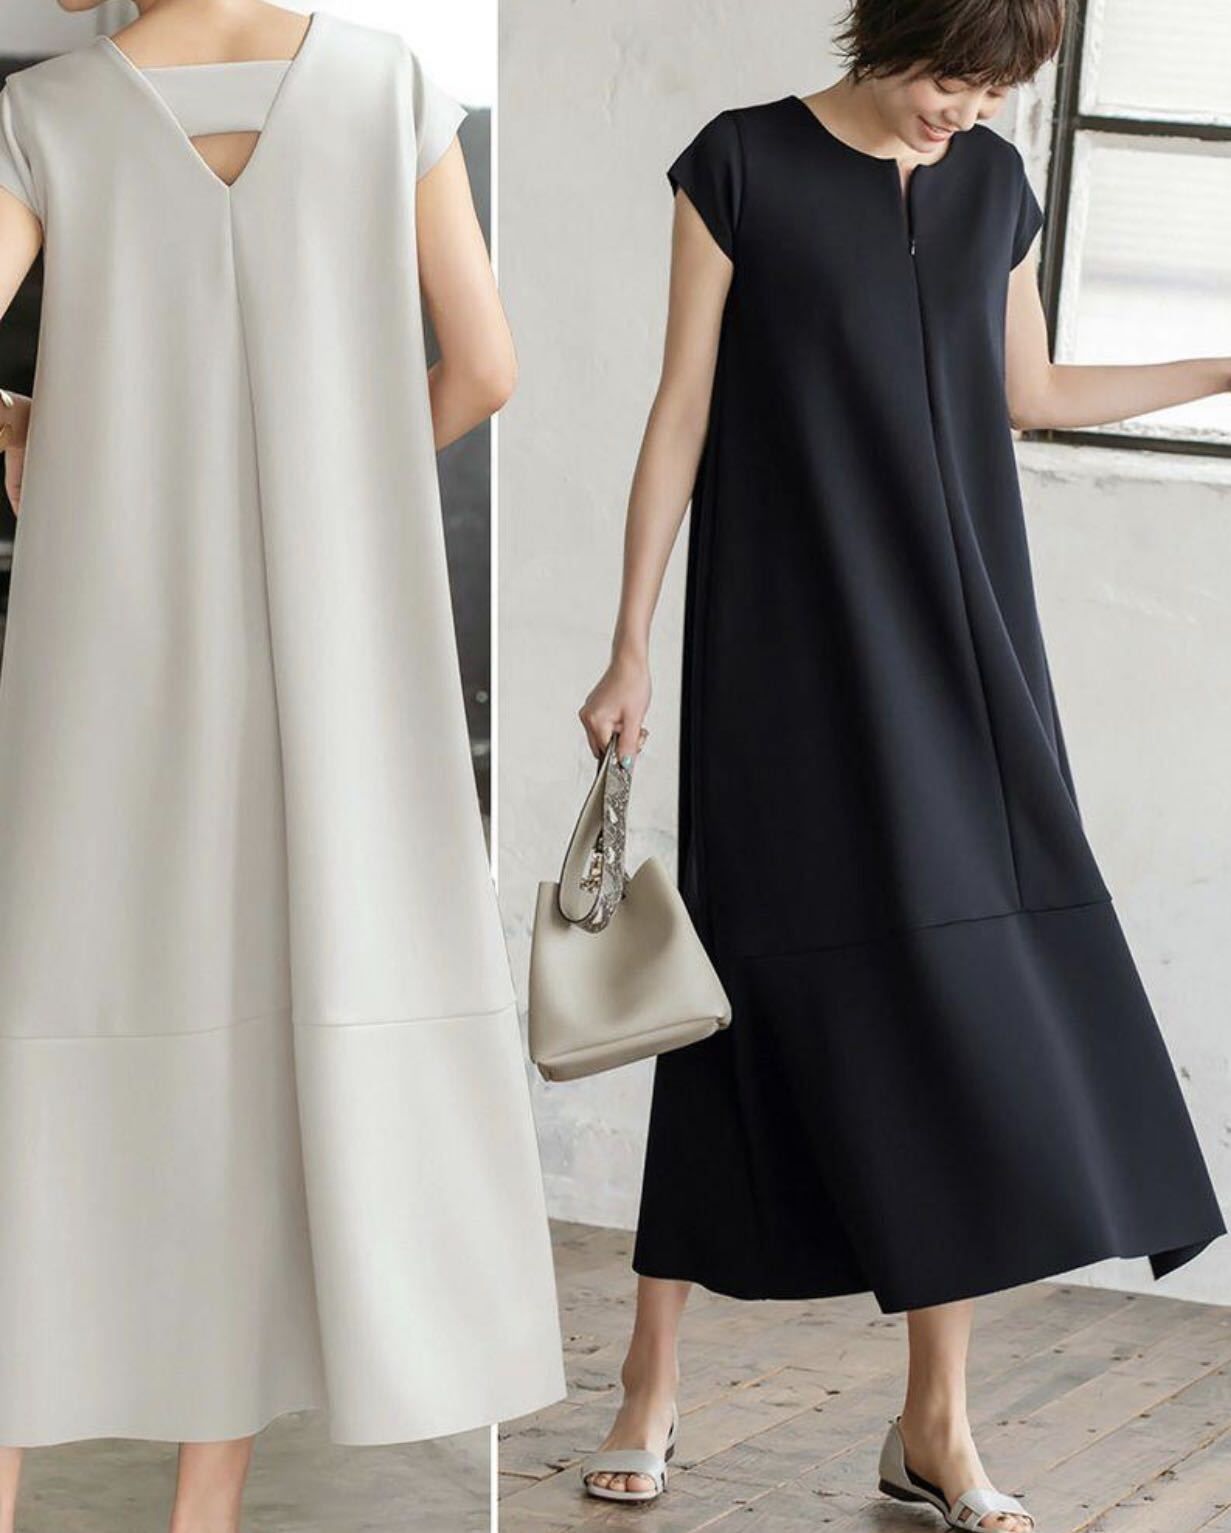 Casual Dresses Womens Solid Color Loose All Fashion Design Elegant Basic  Dress For Female Unique Simple Skirts From Blueberry12, $22.95 | DHgate.Com